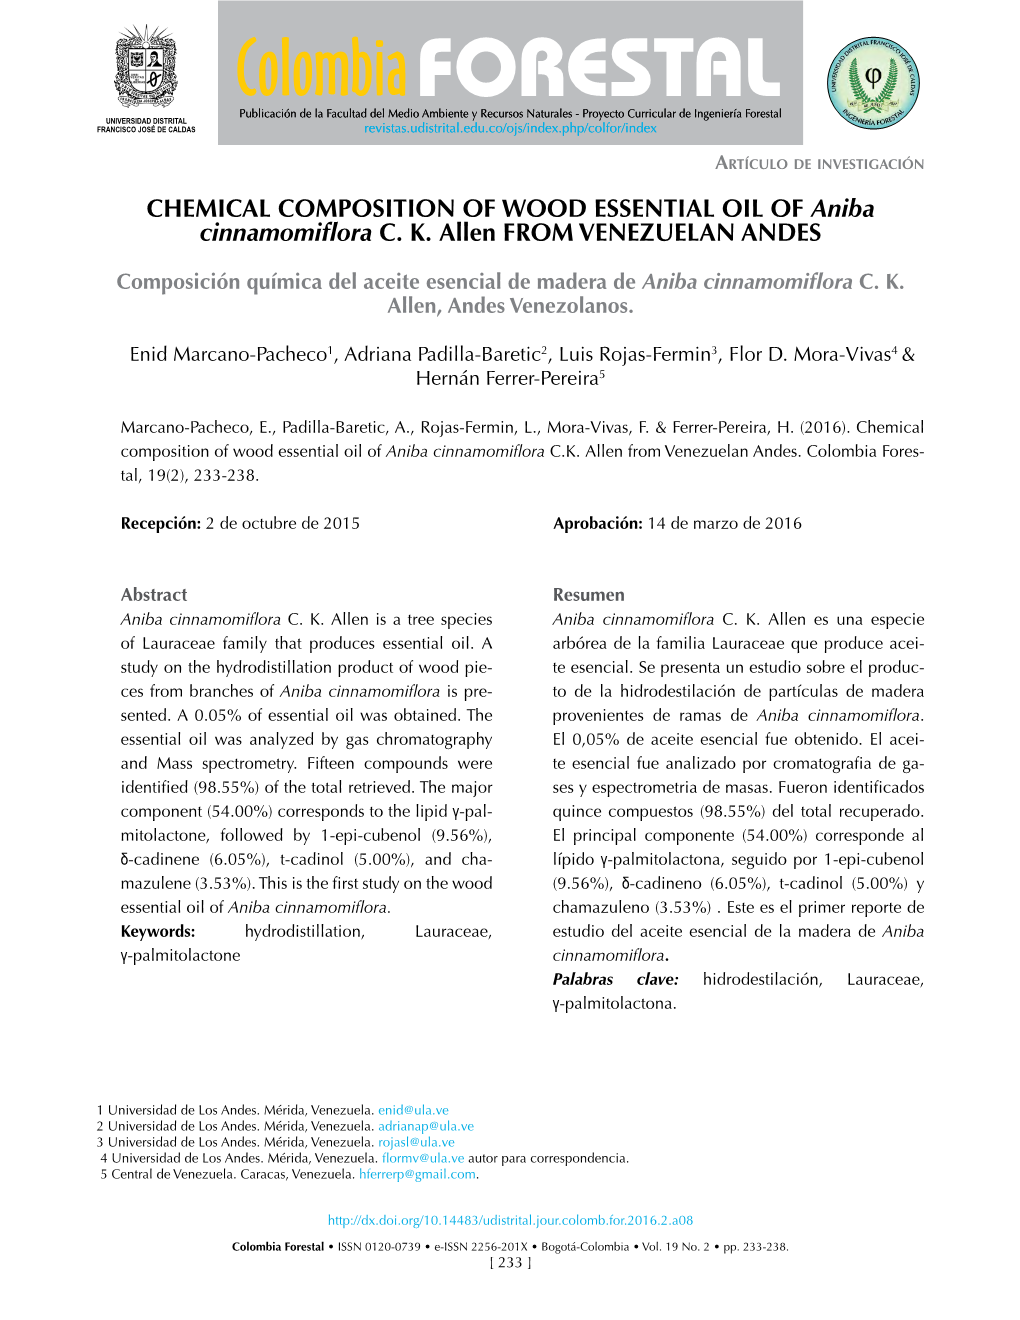 CHEMICAL COMPOSITION of WOOD ESSENTIAL OIL of Aniba Cinnamomiflora C. K. Allen from VENEZUELAN ANDES